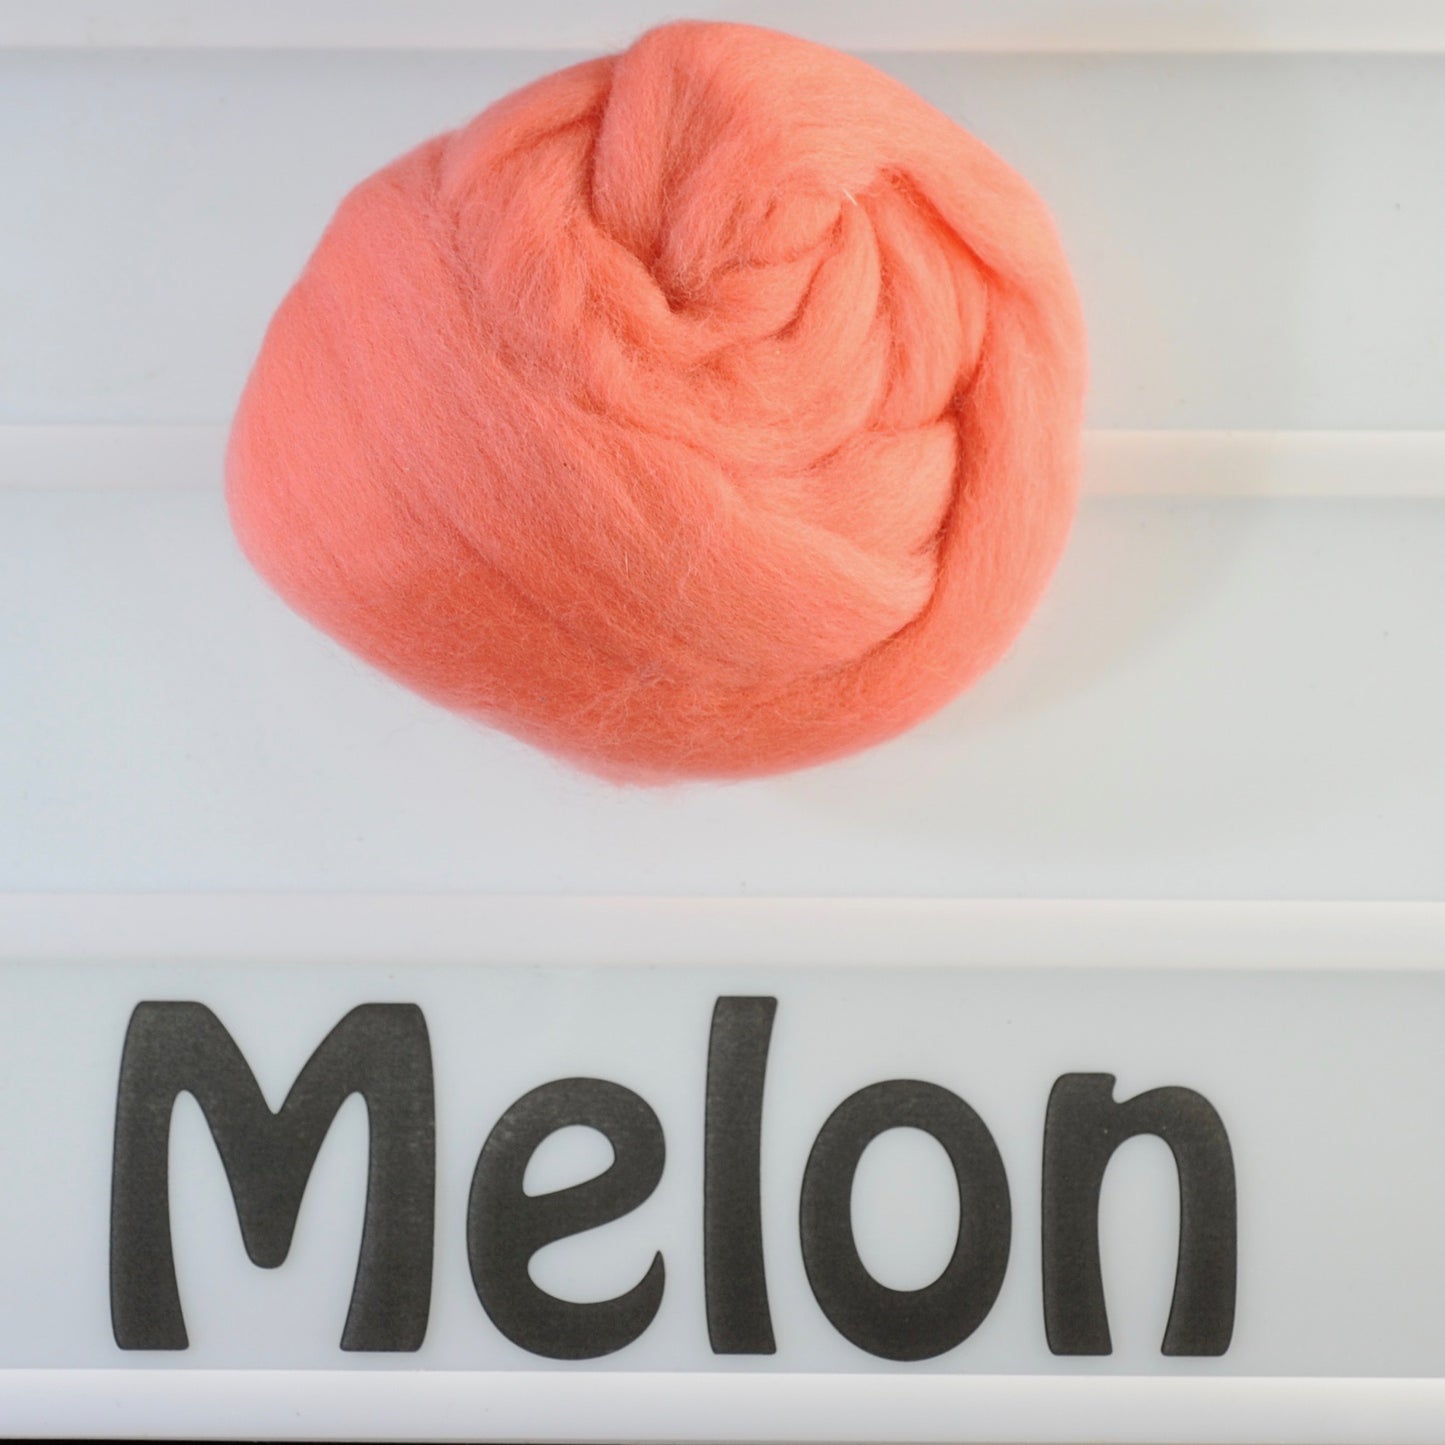 Dyed 23 micron Merino Wool Combed Top - 1 oz